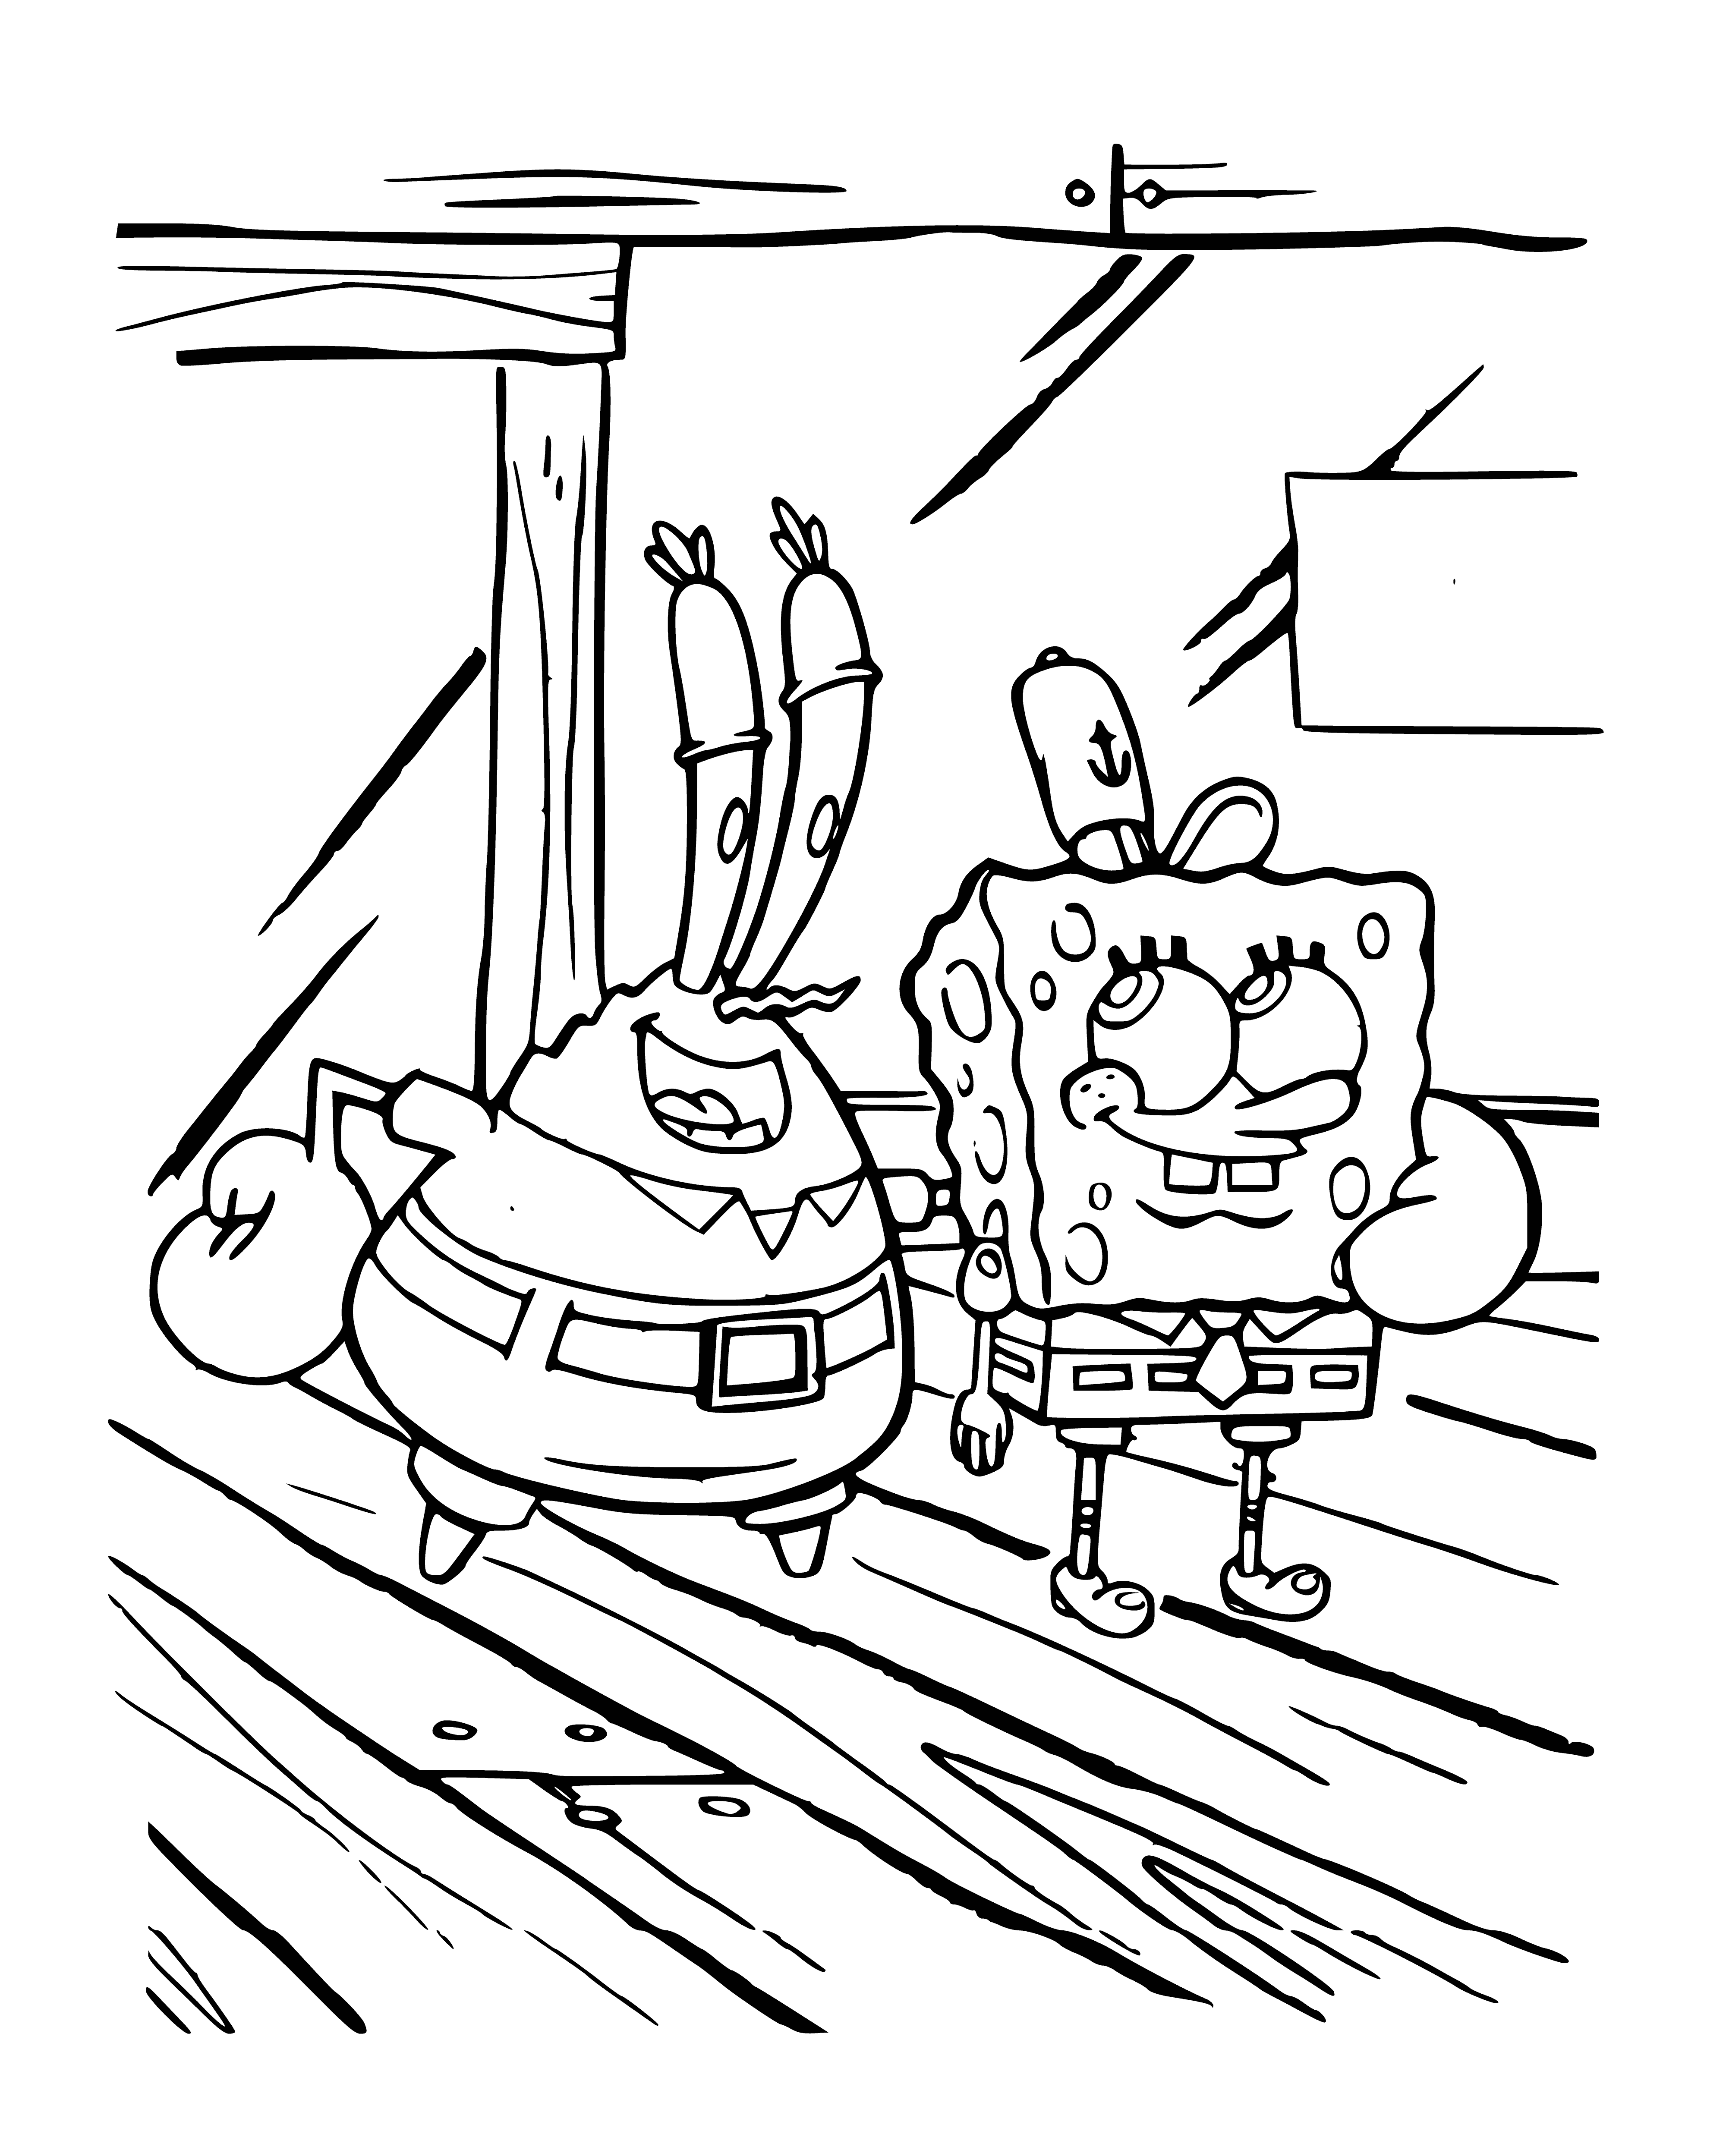 Hired coloring page